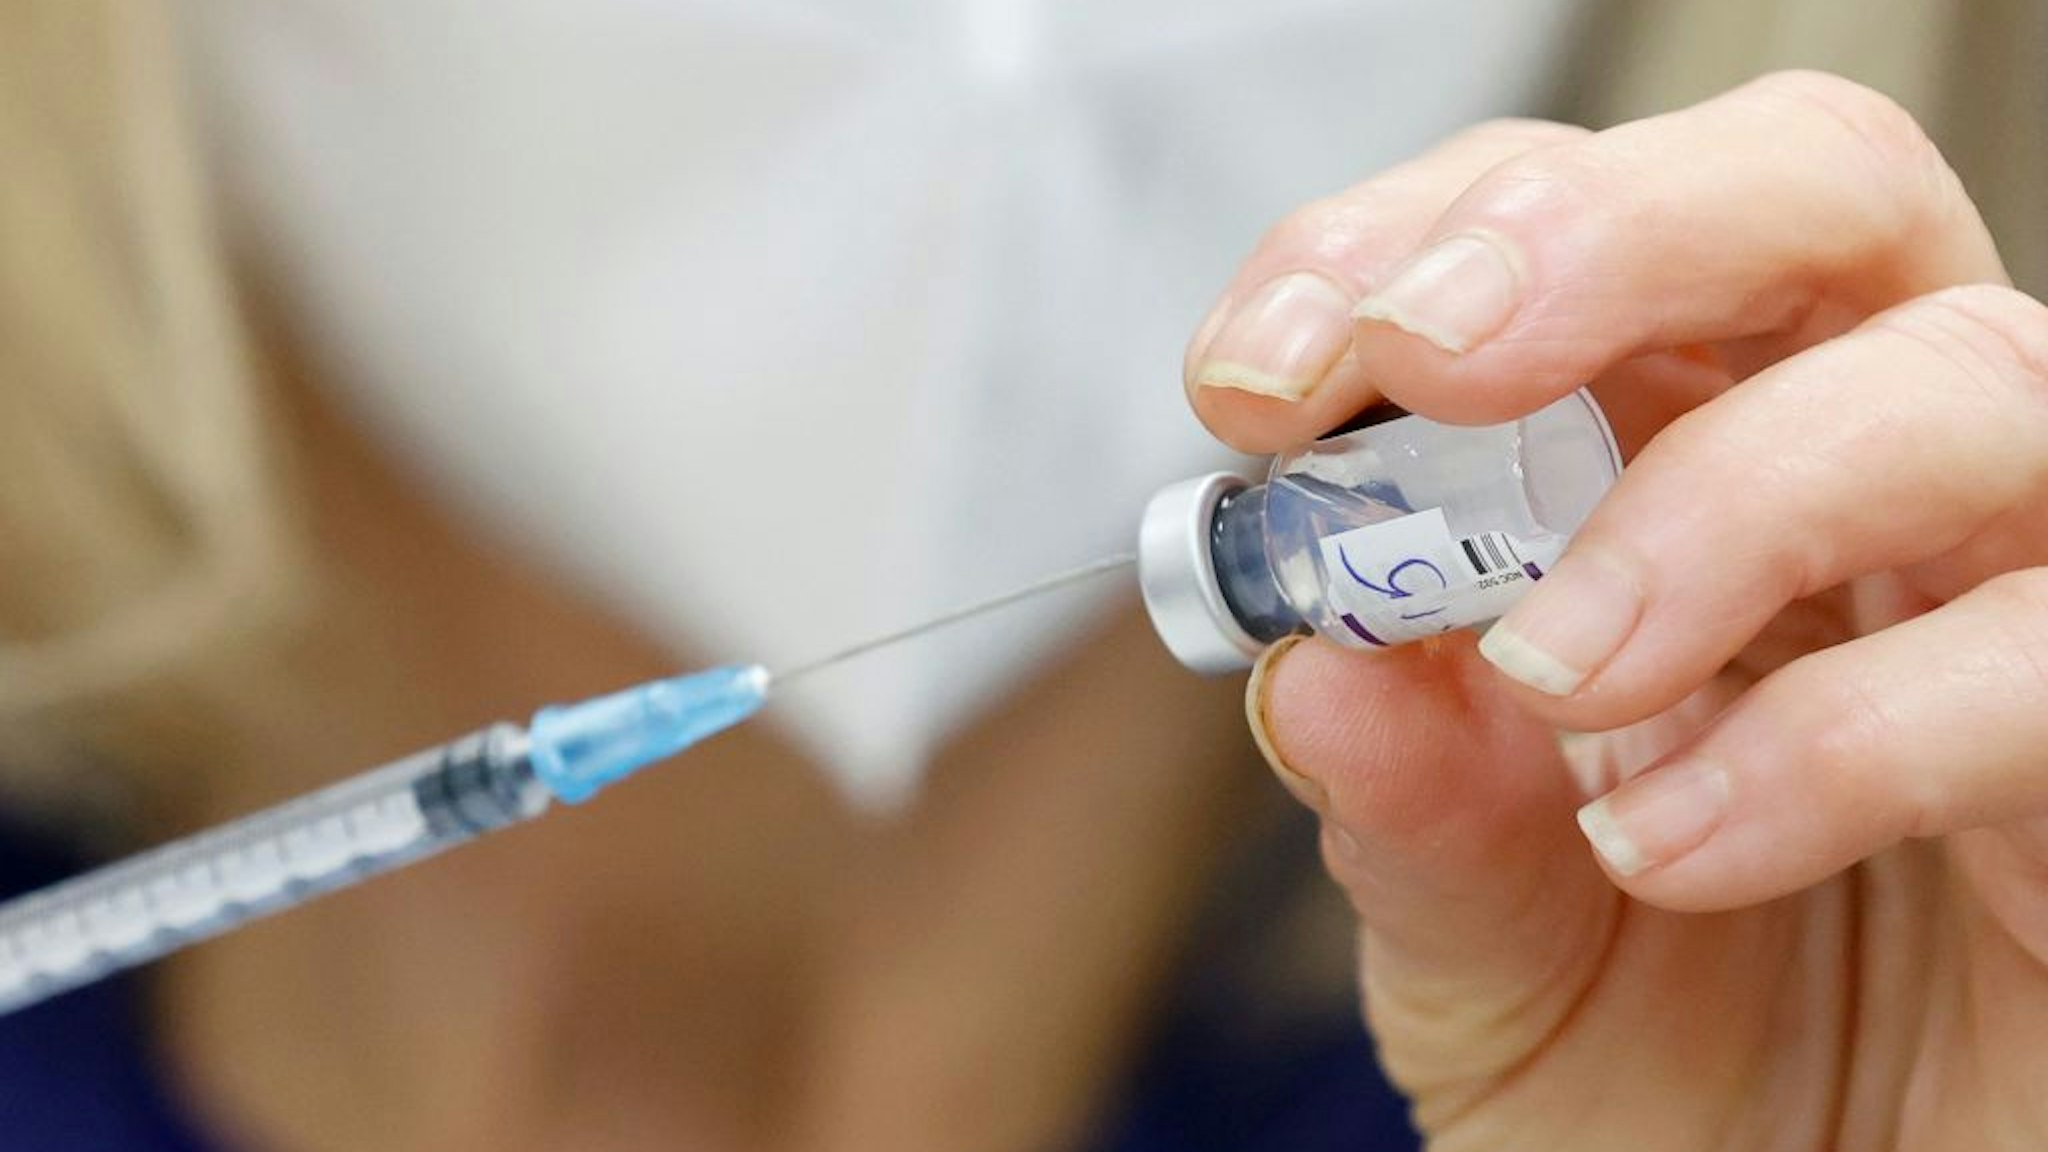 An Israeli nurse prepares a dose of the Pfizer-BioNTech COVID-19 coronavirus vaccine at the Sheba Medical Center in Ramat Gan near Tel Aviv, on December 27, 2021, as the Israeli hospital conducted a trial of the vaccine's fourth jab on staff volunteers. (Photo by JACK GUEZ / AFP) (Photo by JACK GUEZ/AFP via Getty Images)